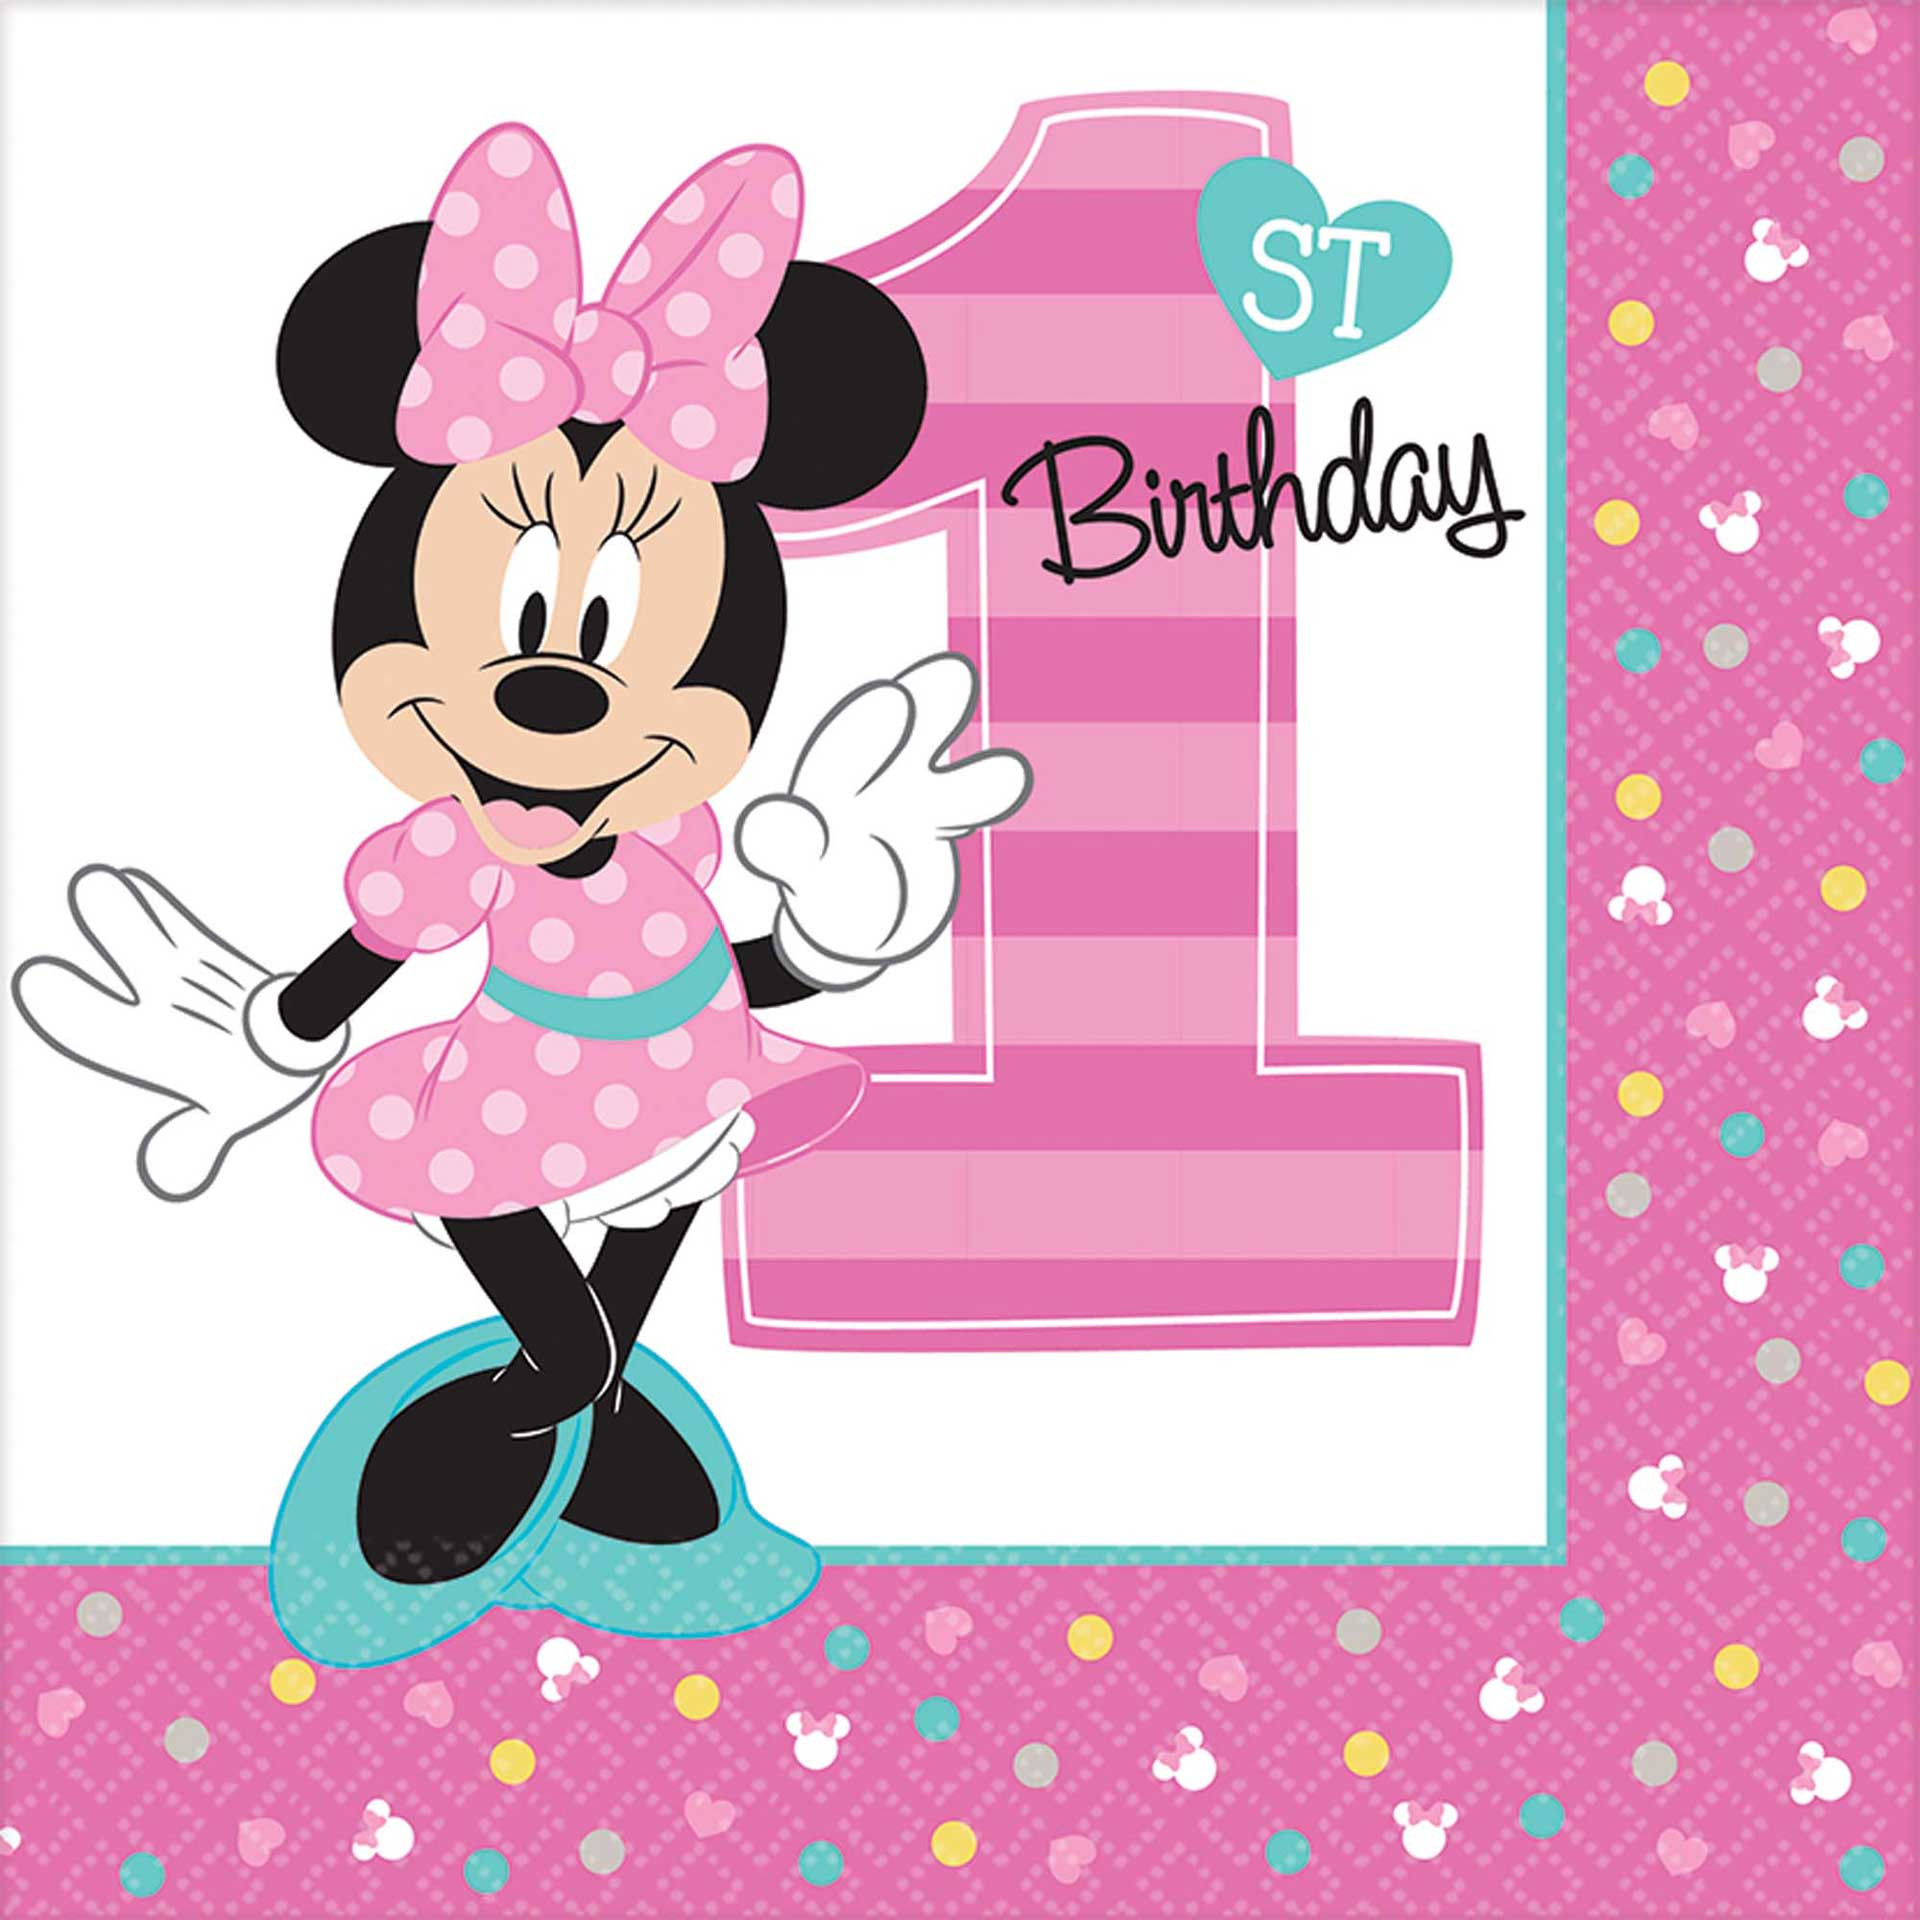 Minnie Mouse Ideas For 1st Birthday Party
 Minnie Mouse 1st Birthday Party Supplies Theme Party Packs